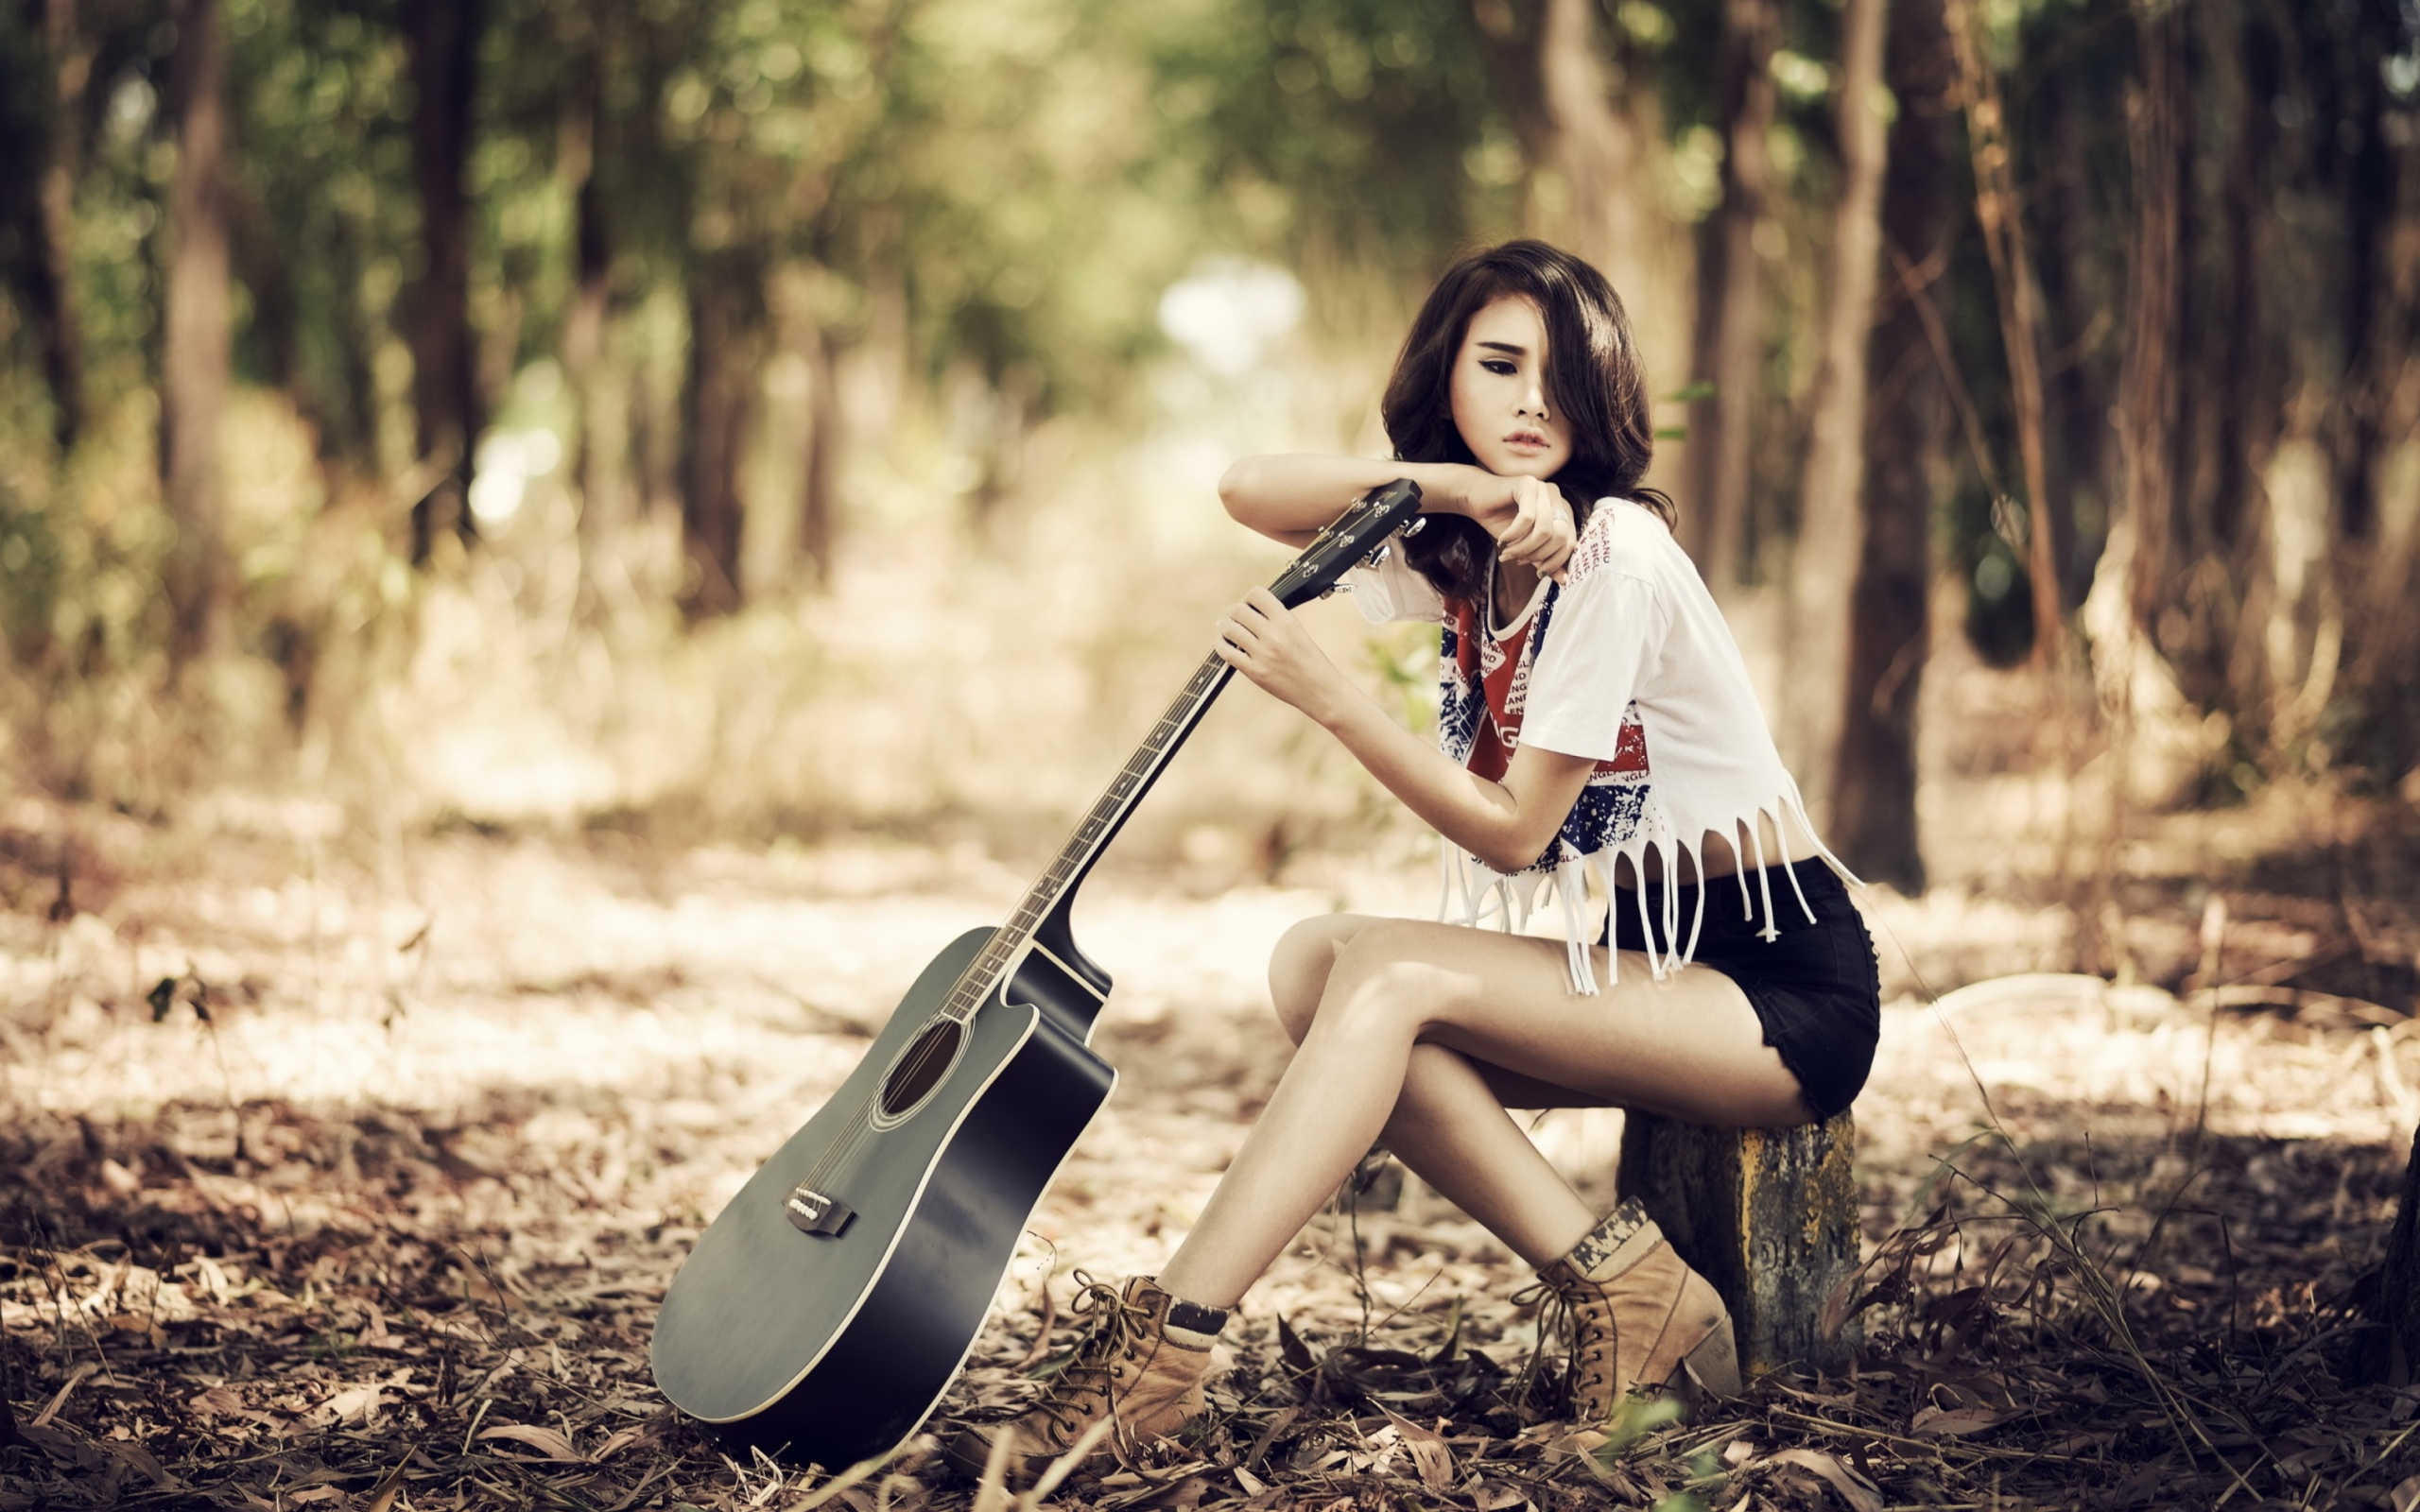 Das Pretty Brunette Model With Guitar At Meadow Wallpaper 2560x1600